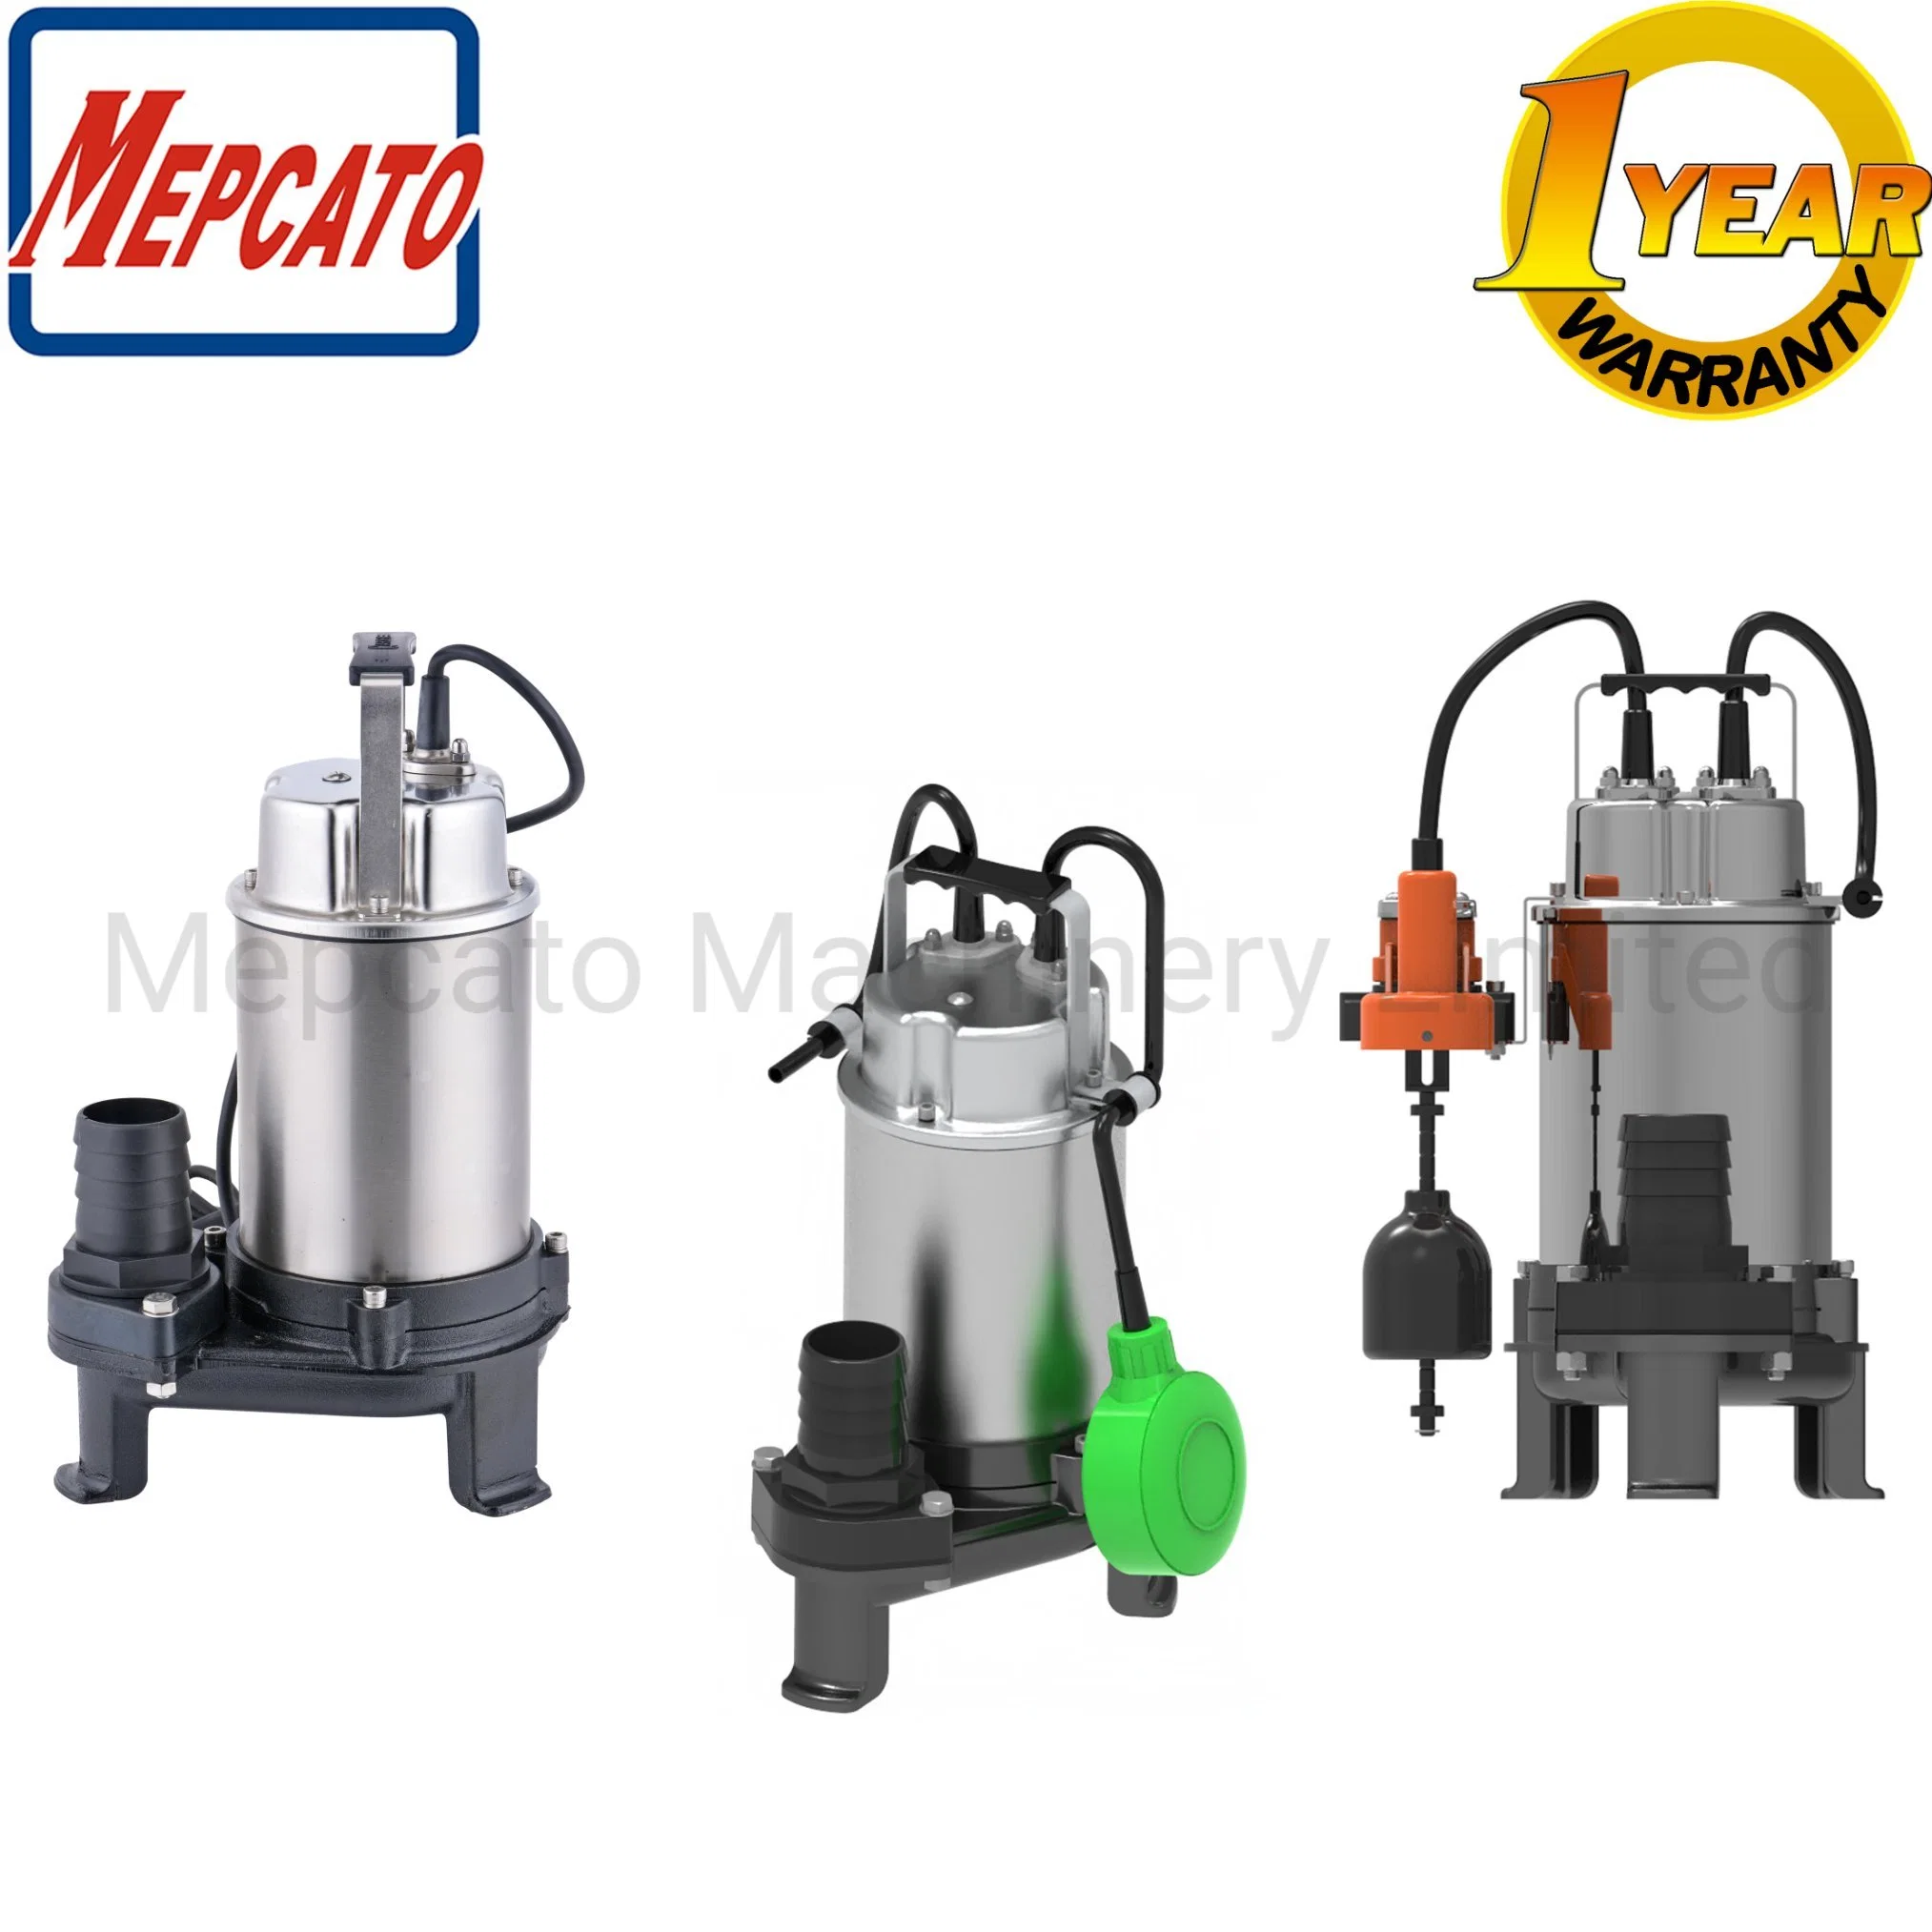 Underground Sewage Water Garage Sump Waste Water Stainless Steel Cast Iron Submersible Centrifugal Electric Cutting Pump